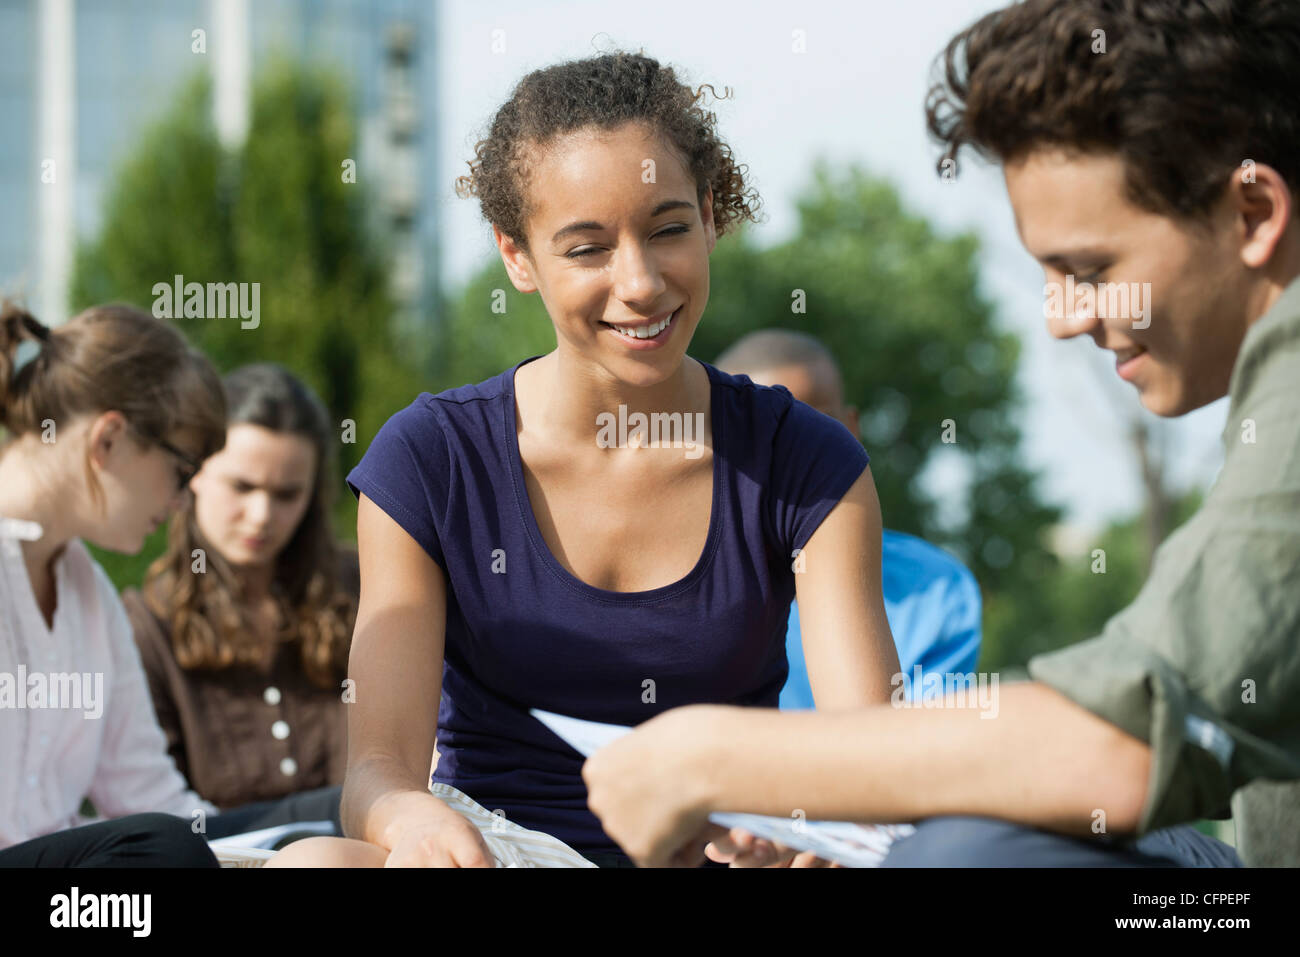 University students studying together outdoors, focus on one woman Stock Photo